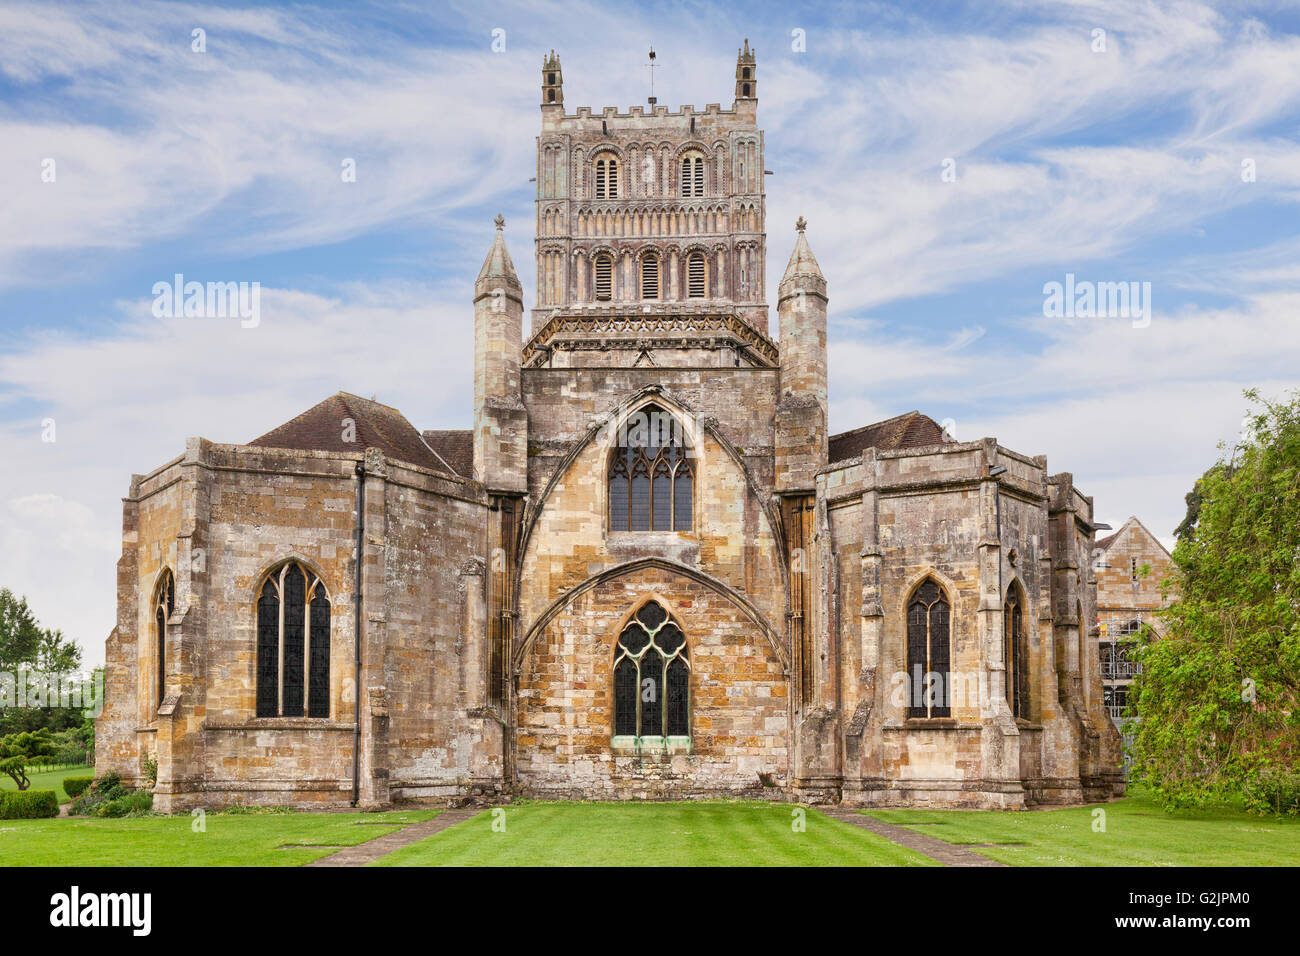 The east side of the Abbey Church of St Mary the Virgin, Tewkesbury, Gloucestershire, England. Stock Photo